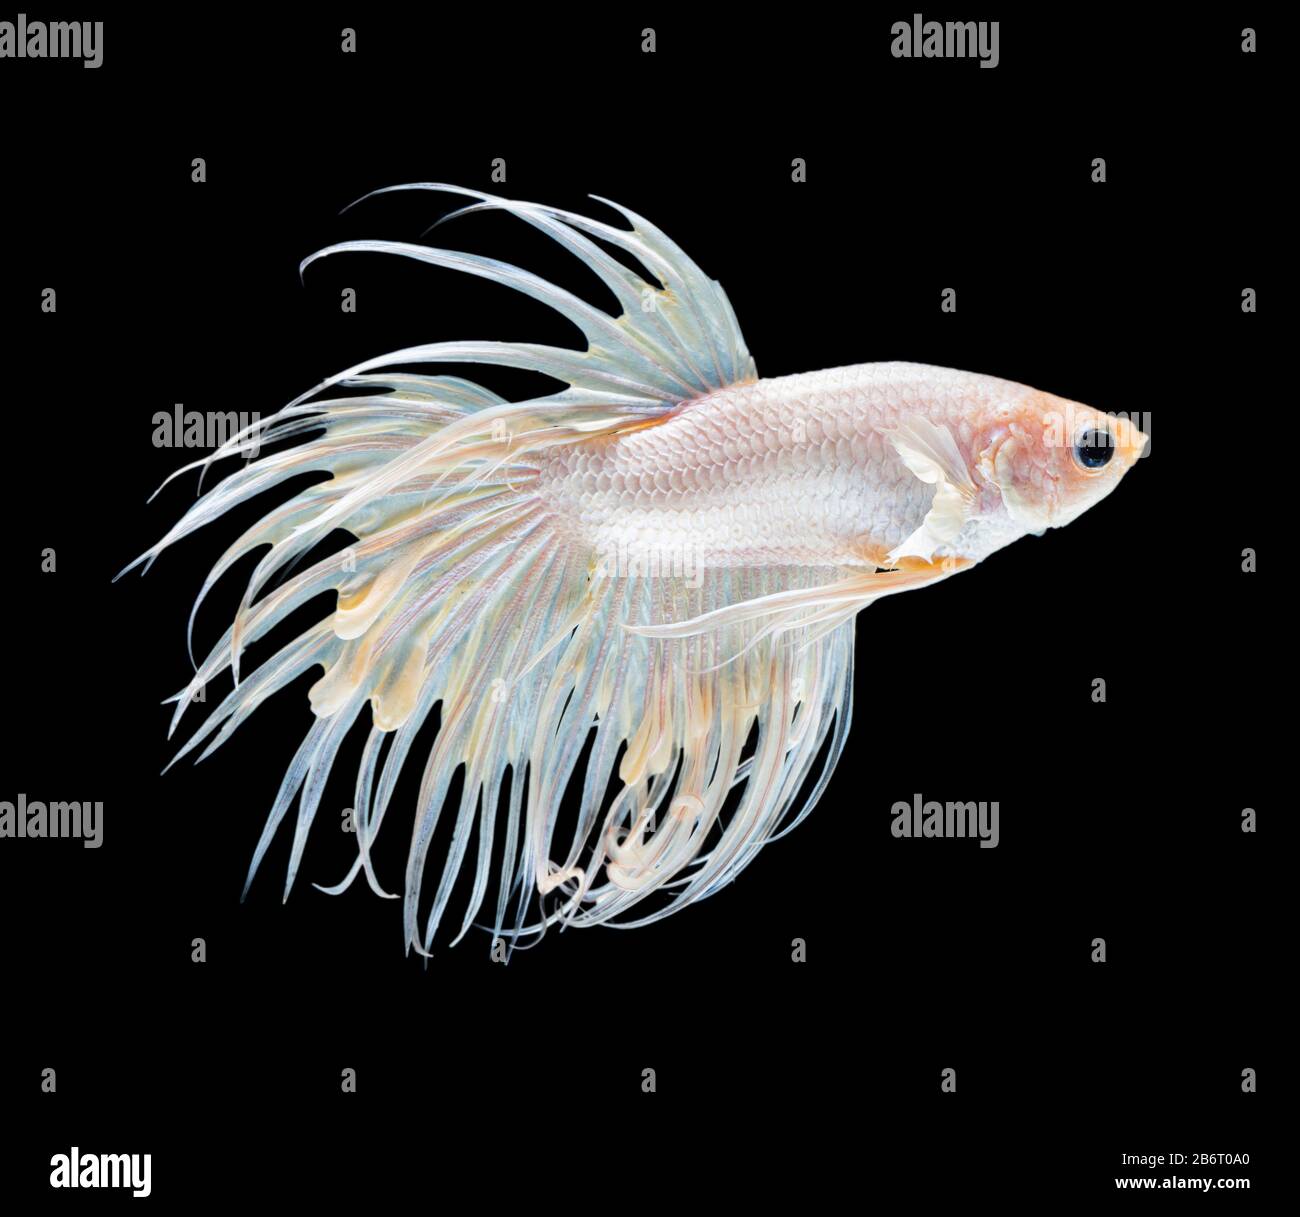 Beautiful white crowntail betta fish siamese fighting fish isolated on black background. fighting fish in movement on black background. Stock Photo